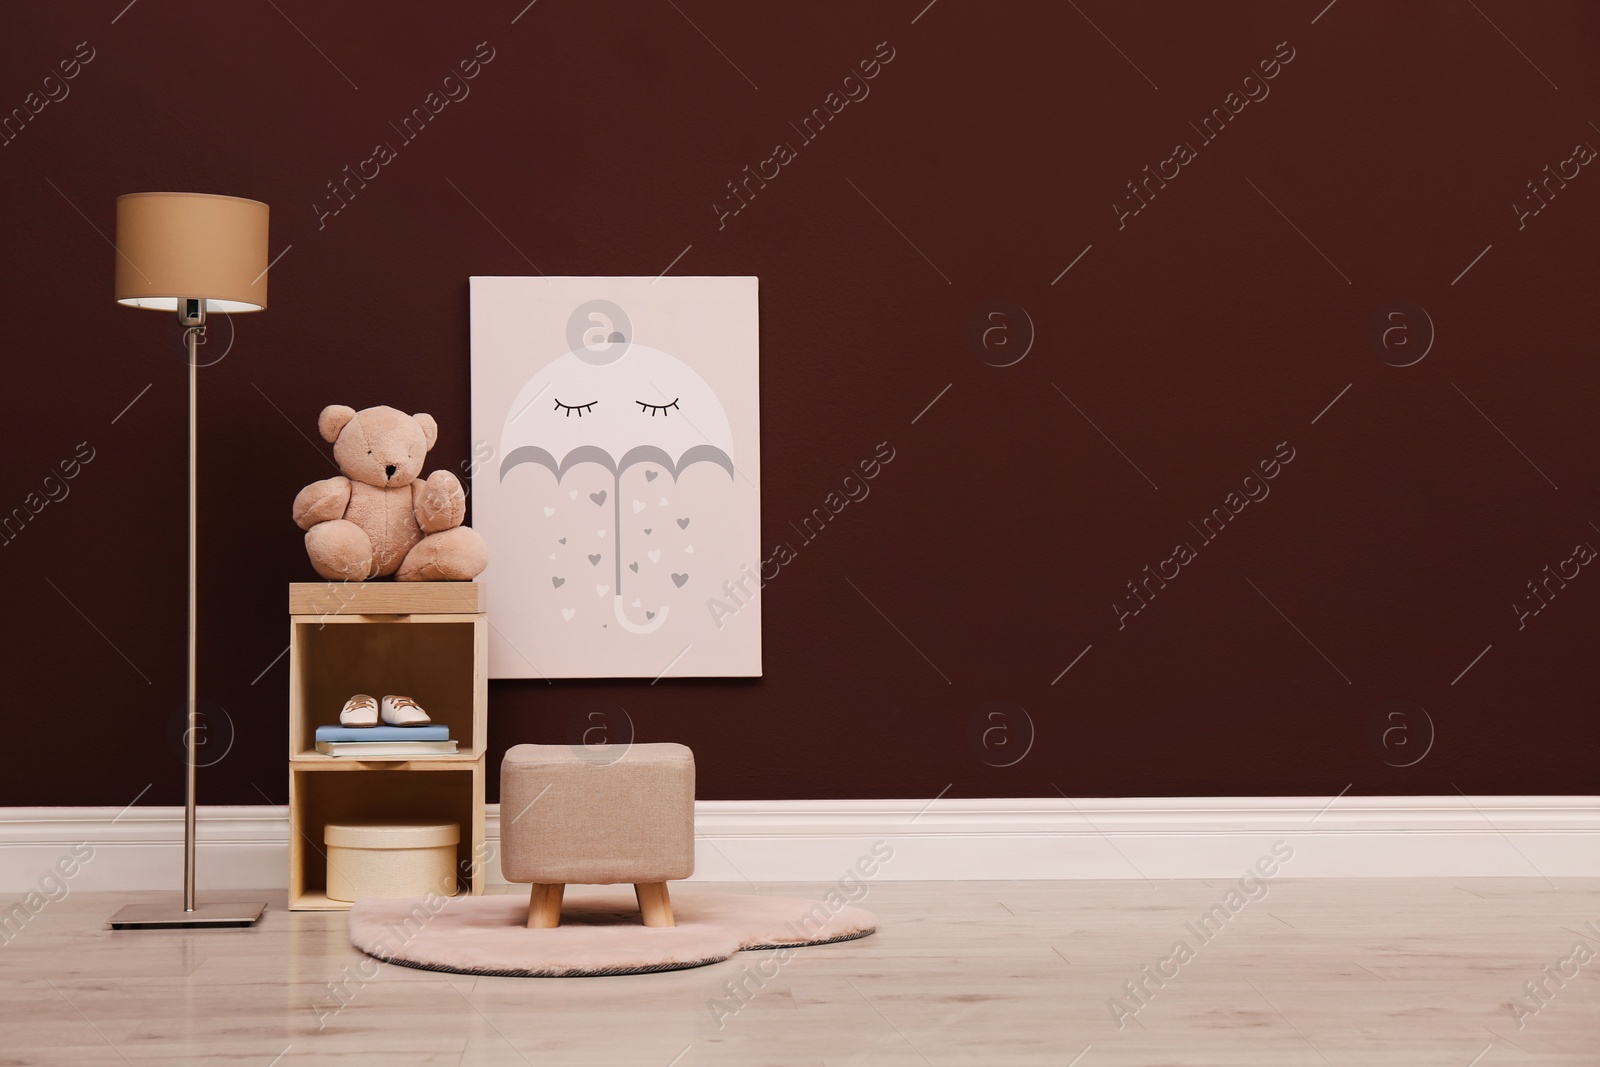 Photo of Stylish beige ottoman, shelving unit with toy bear and lamp in room. Space for text